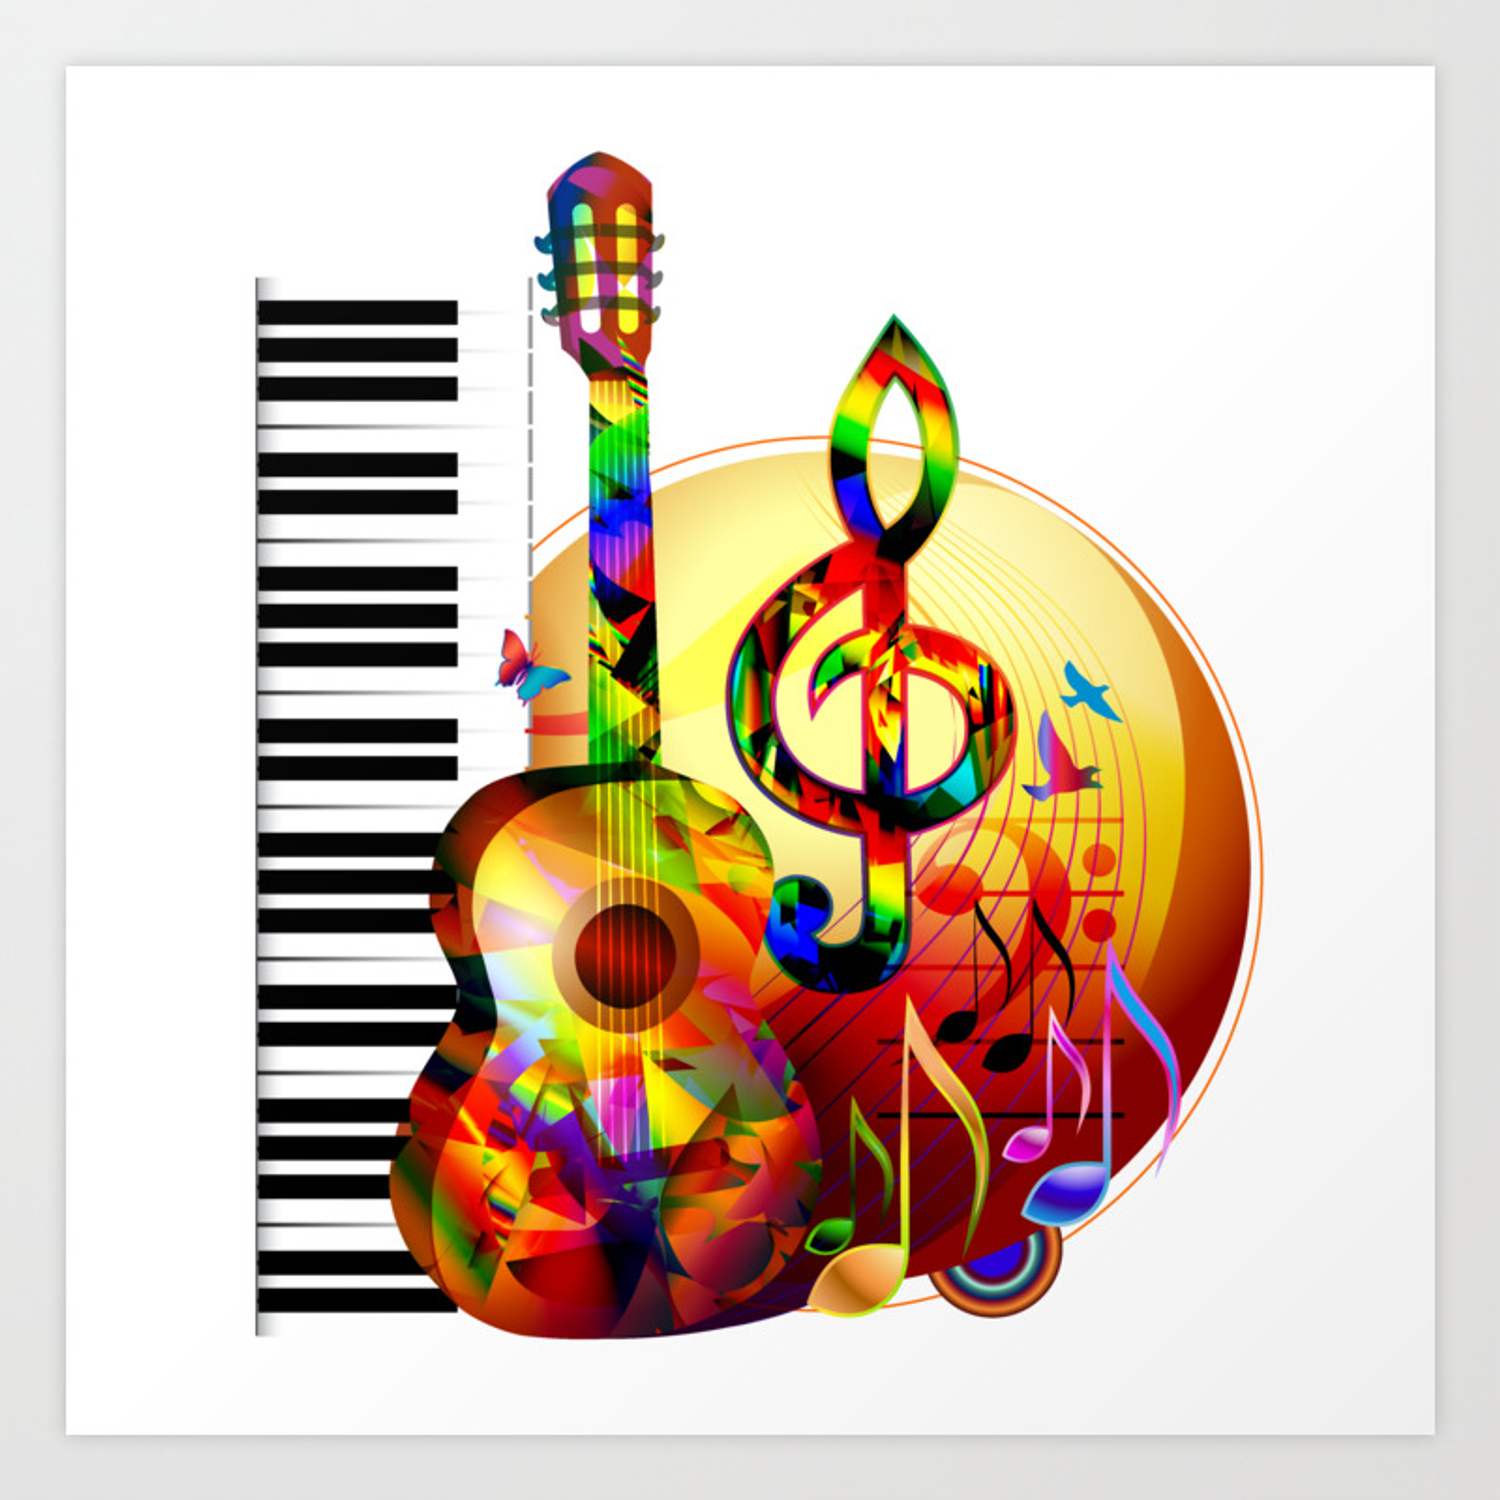 Colorful music instruments.